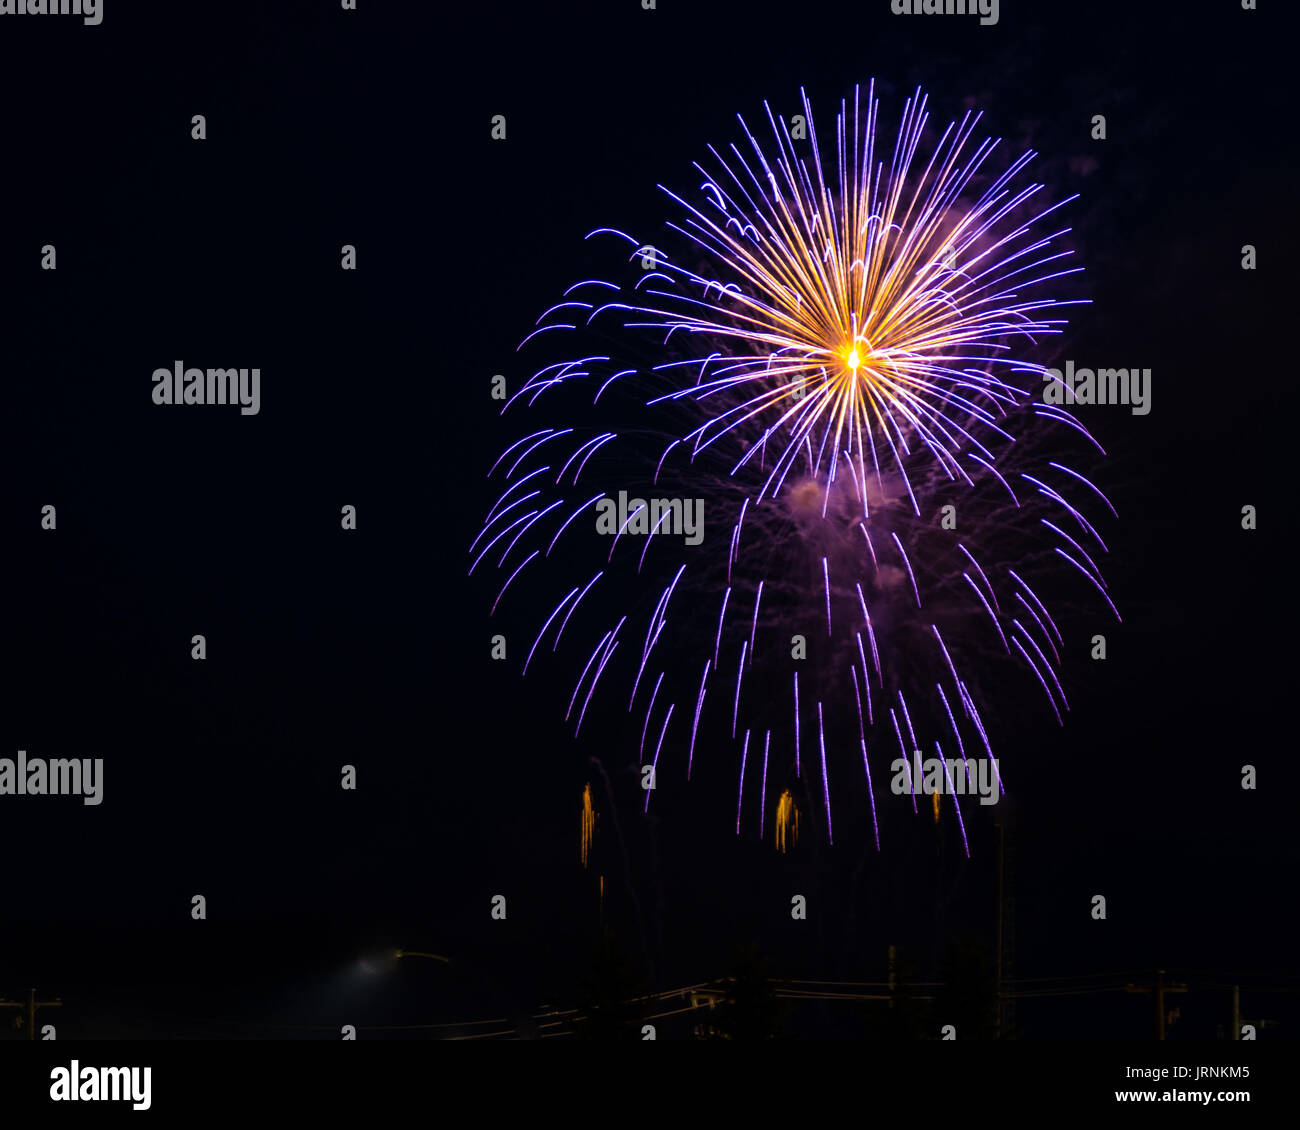 Fireworks display of bright blue and gold colors against a black background during an evening of celebration of a national holiday. Stock Photo